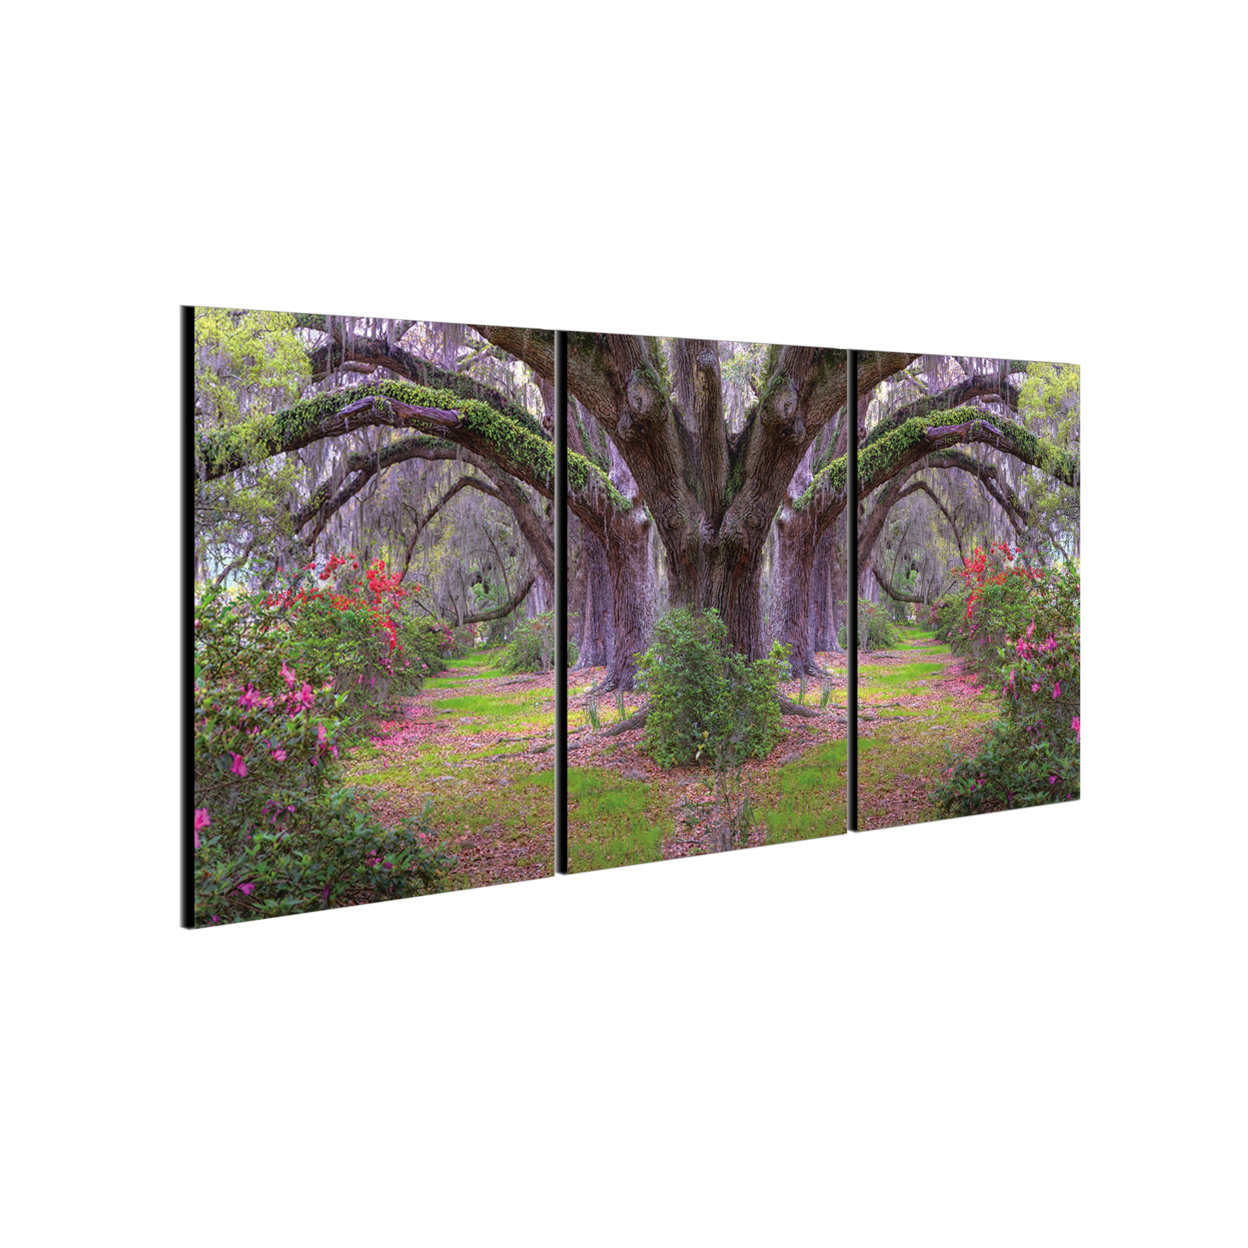 Lavender Cherry 3 Piece Wrapped Canvas Wall Art Print 20x40.5 Inches